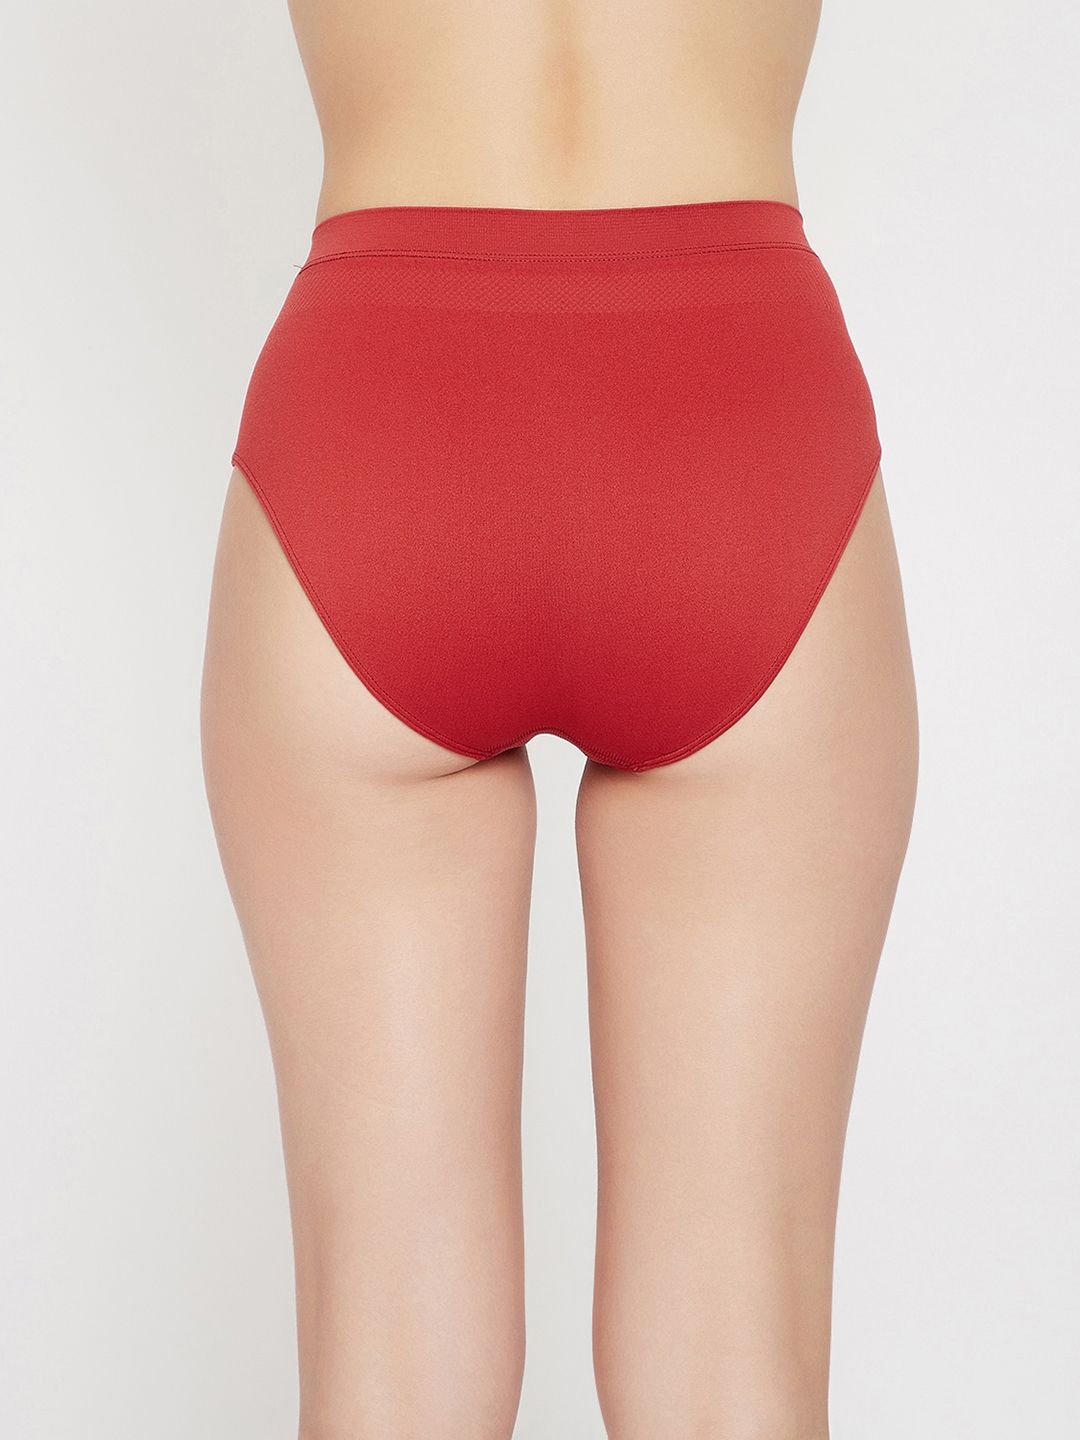 Upgrade Your Essentials: Women's Assorted Panty Pack Collection – C9 Airwear